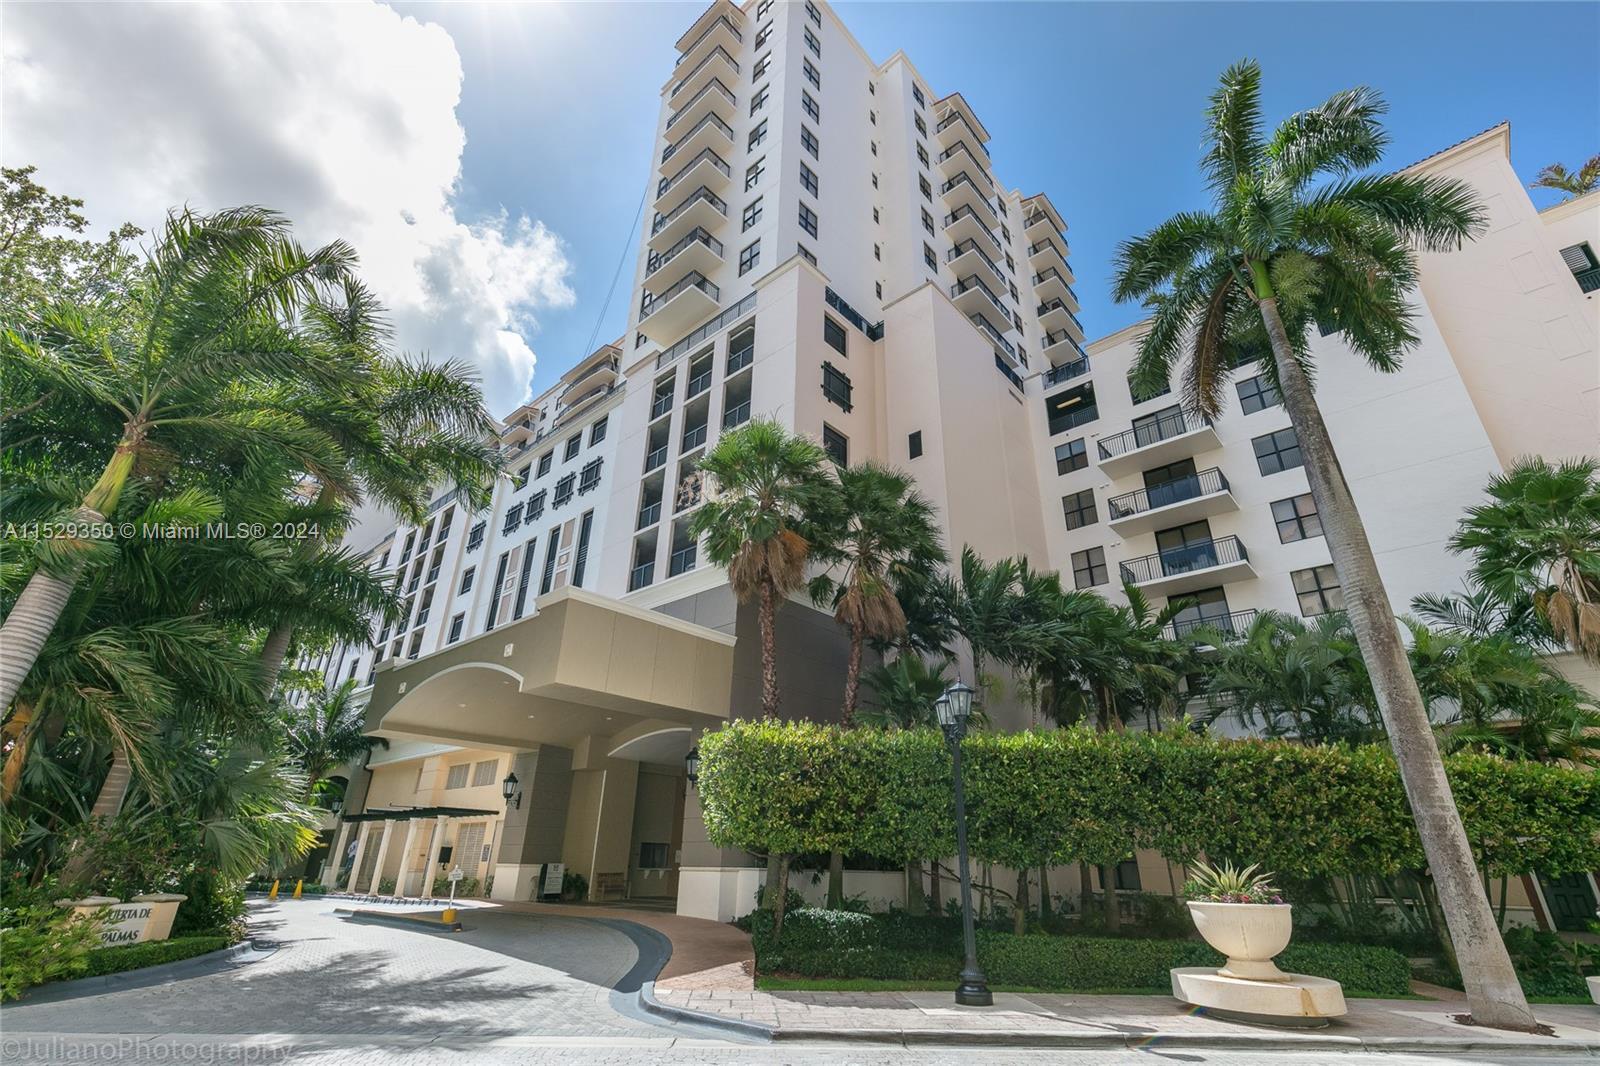 Photo of 888 S Douglas Rd #1402 in Coral Gables, FL